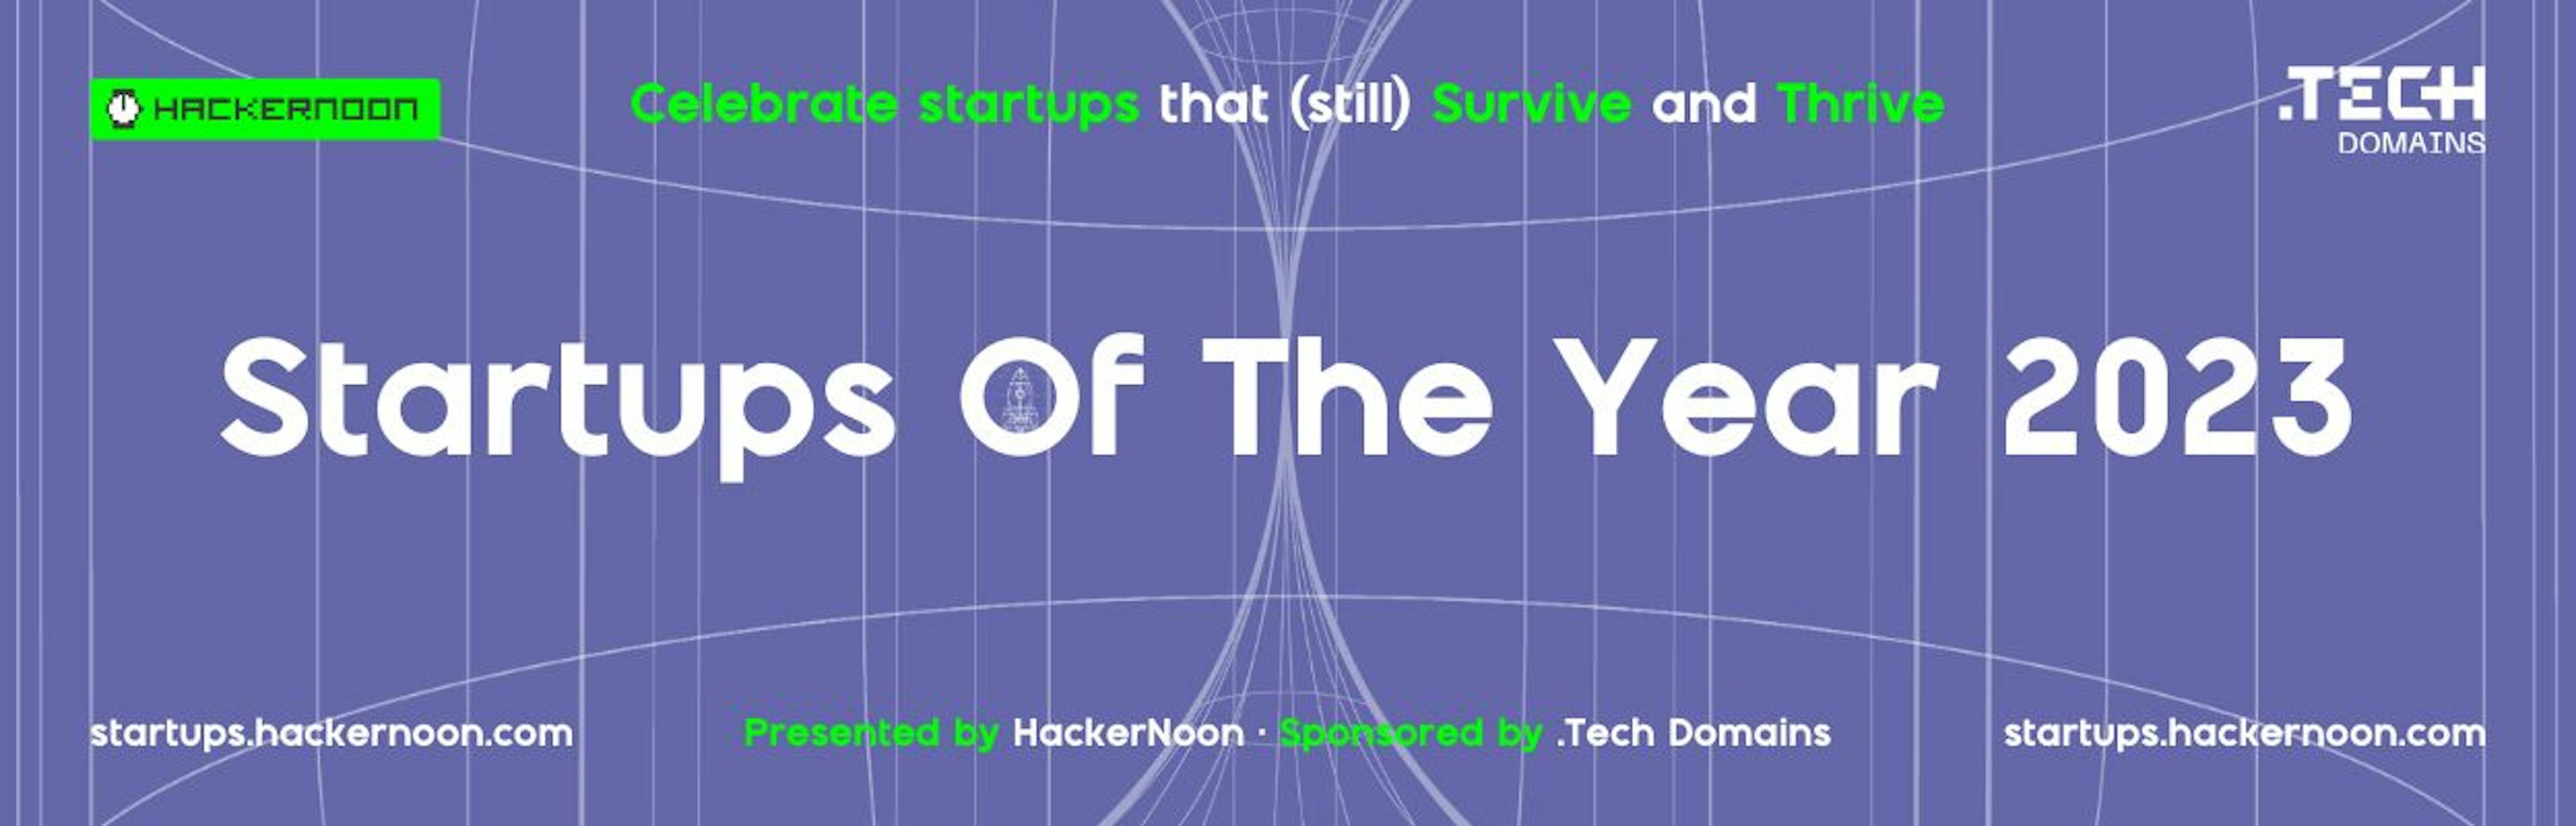 featured image - WTF is Startups of the Year 2023 and Other FAQs